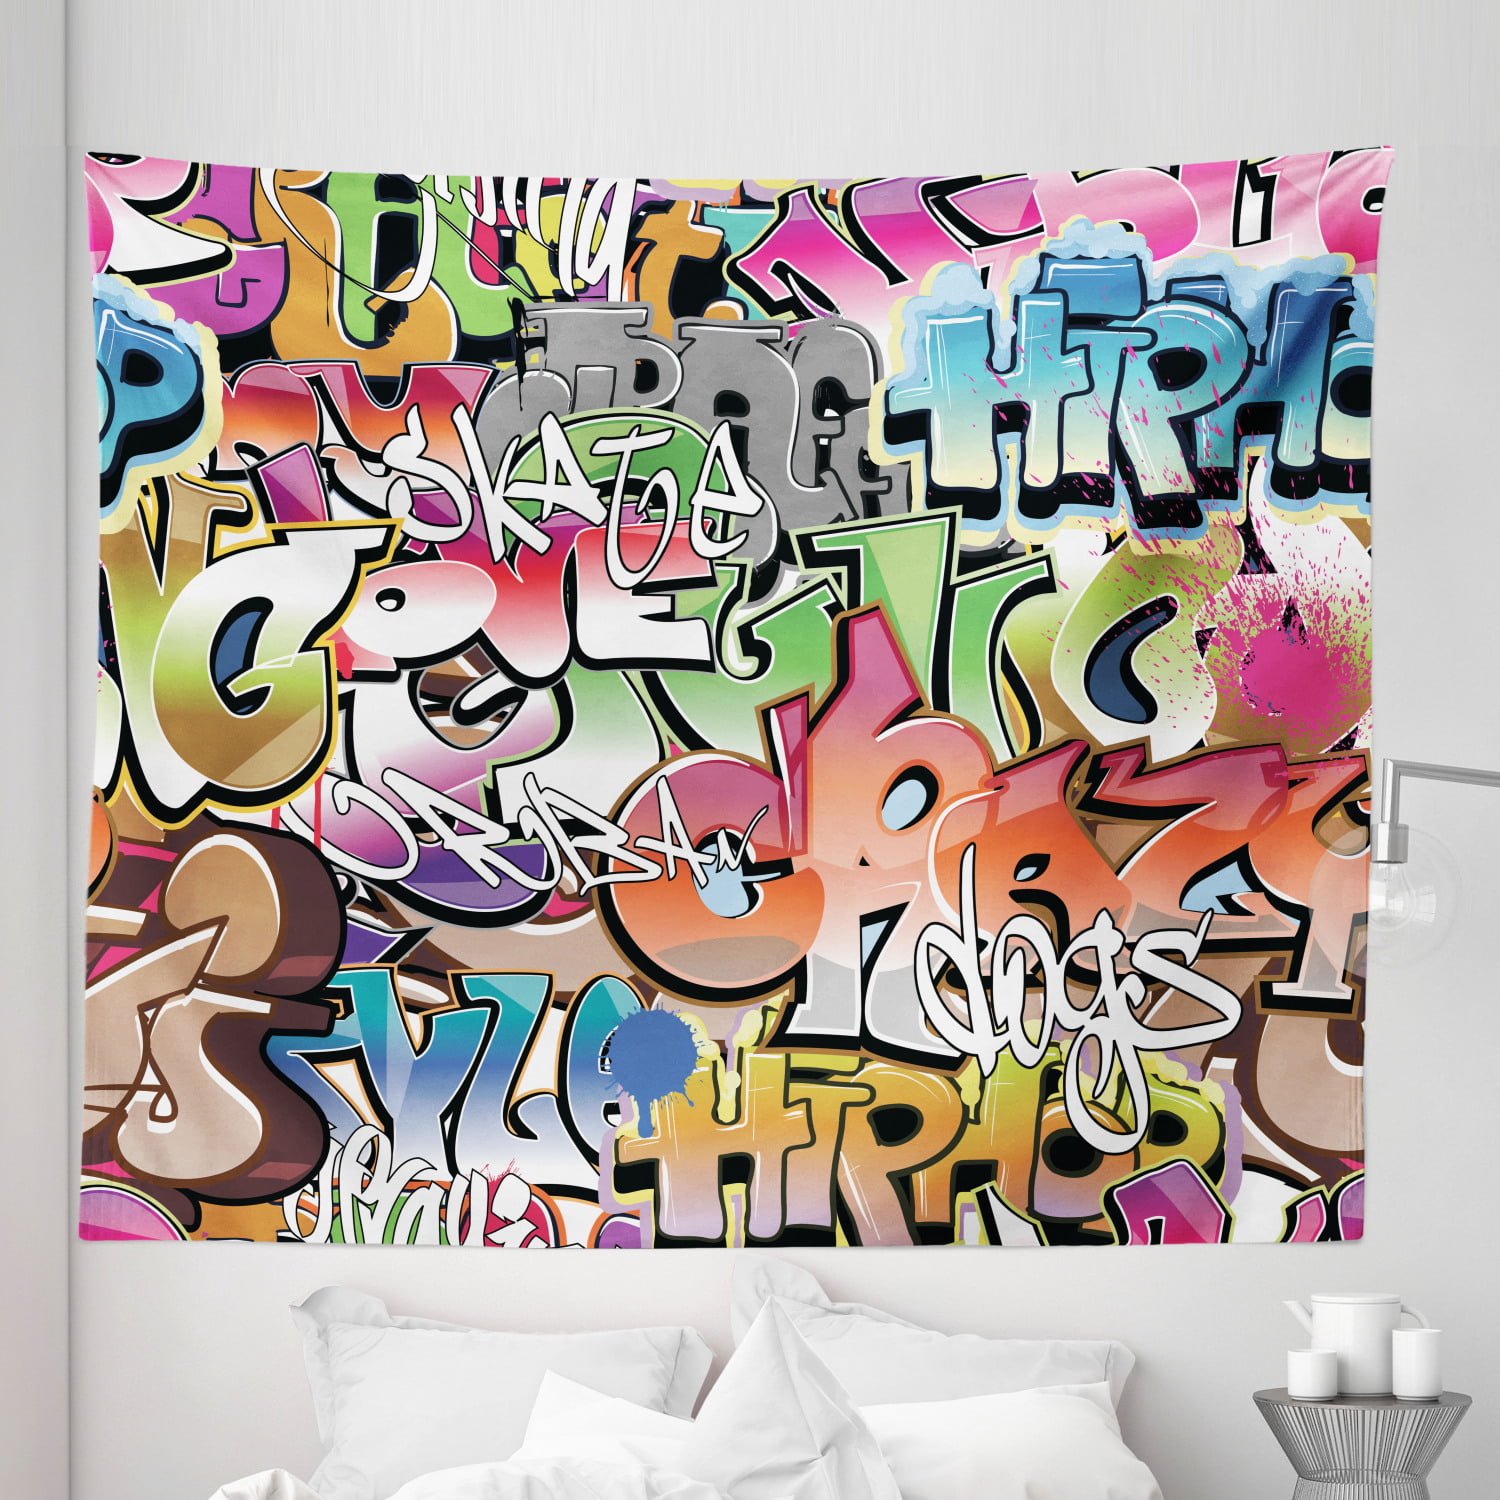 Urban Graffiti Tapestry Blockbuster Style Graffiti Sprayed Overlapping Blocky Letters Street Art Fabric Wall Hanging Decor For Bedroom Living Room Dorm 5 Sizes Multicolor By Ambesonne Walmart Com